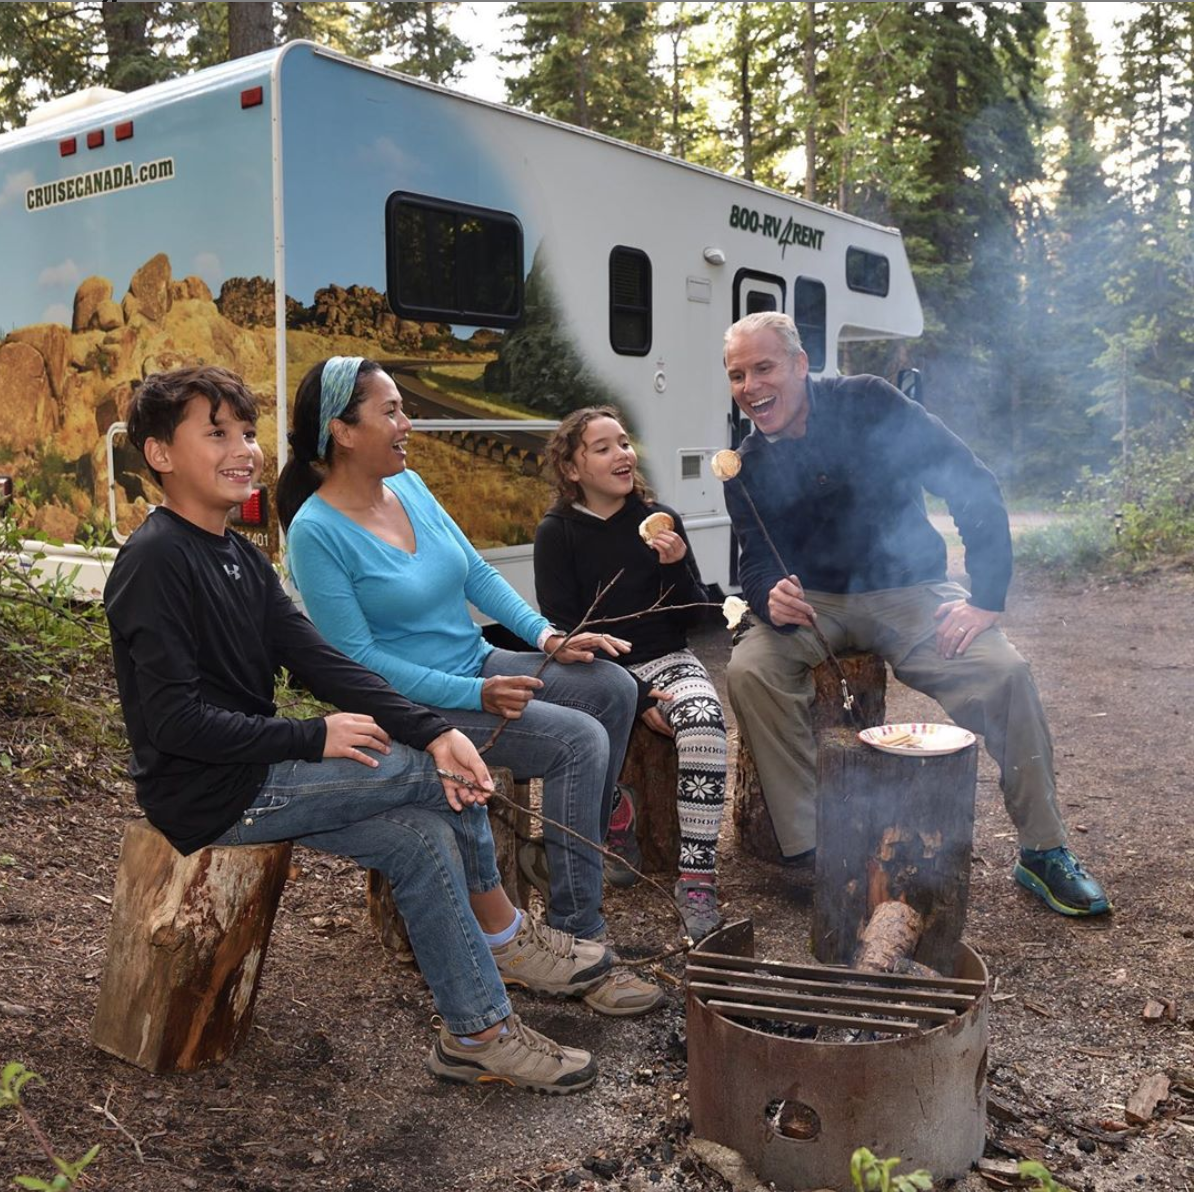 Rent outdoor gear while you're camping with Reserve America and Arrive -  Curbed